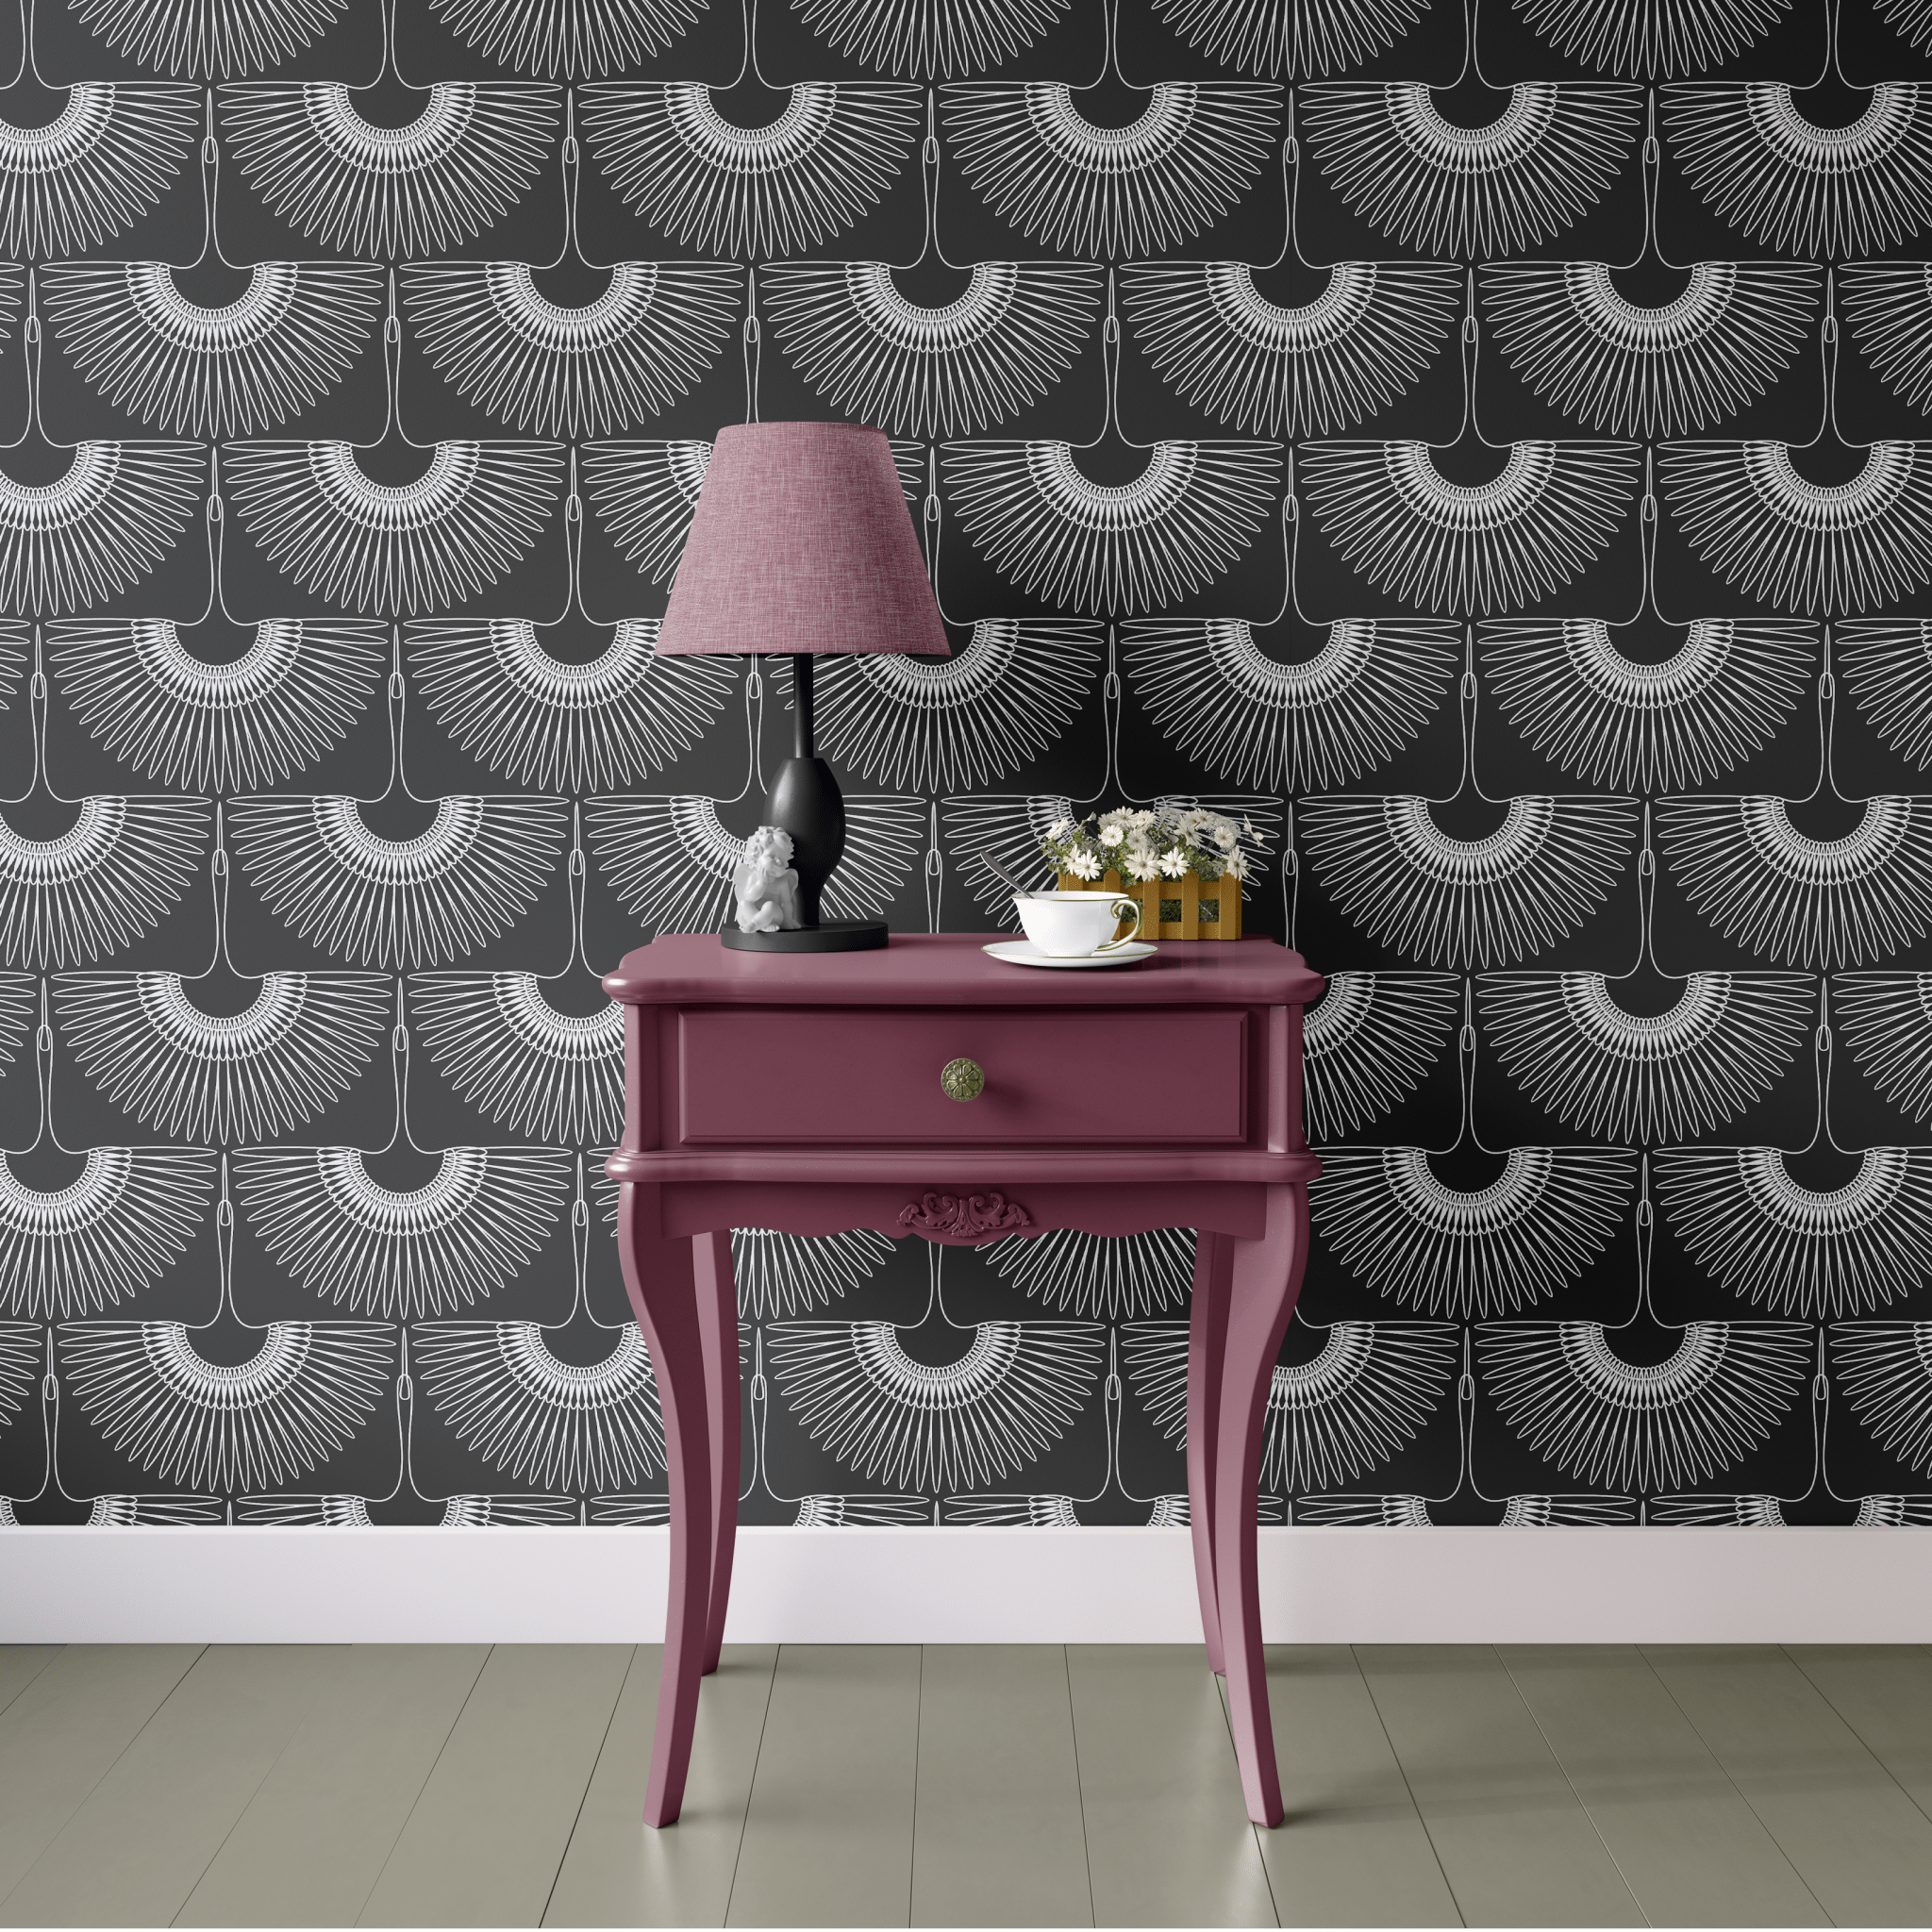 A modern room featuring black heron-patterned wallpaper, with a bold pink console table and a lamp, creating a striking contrast.